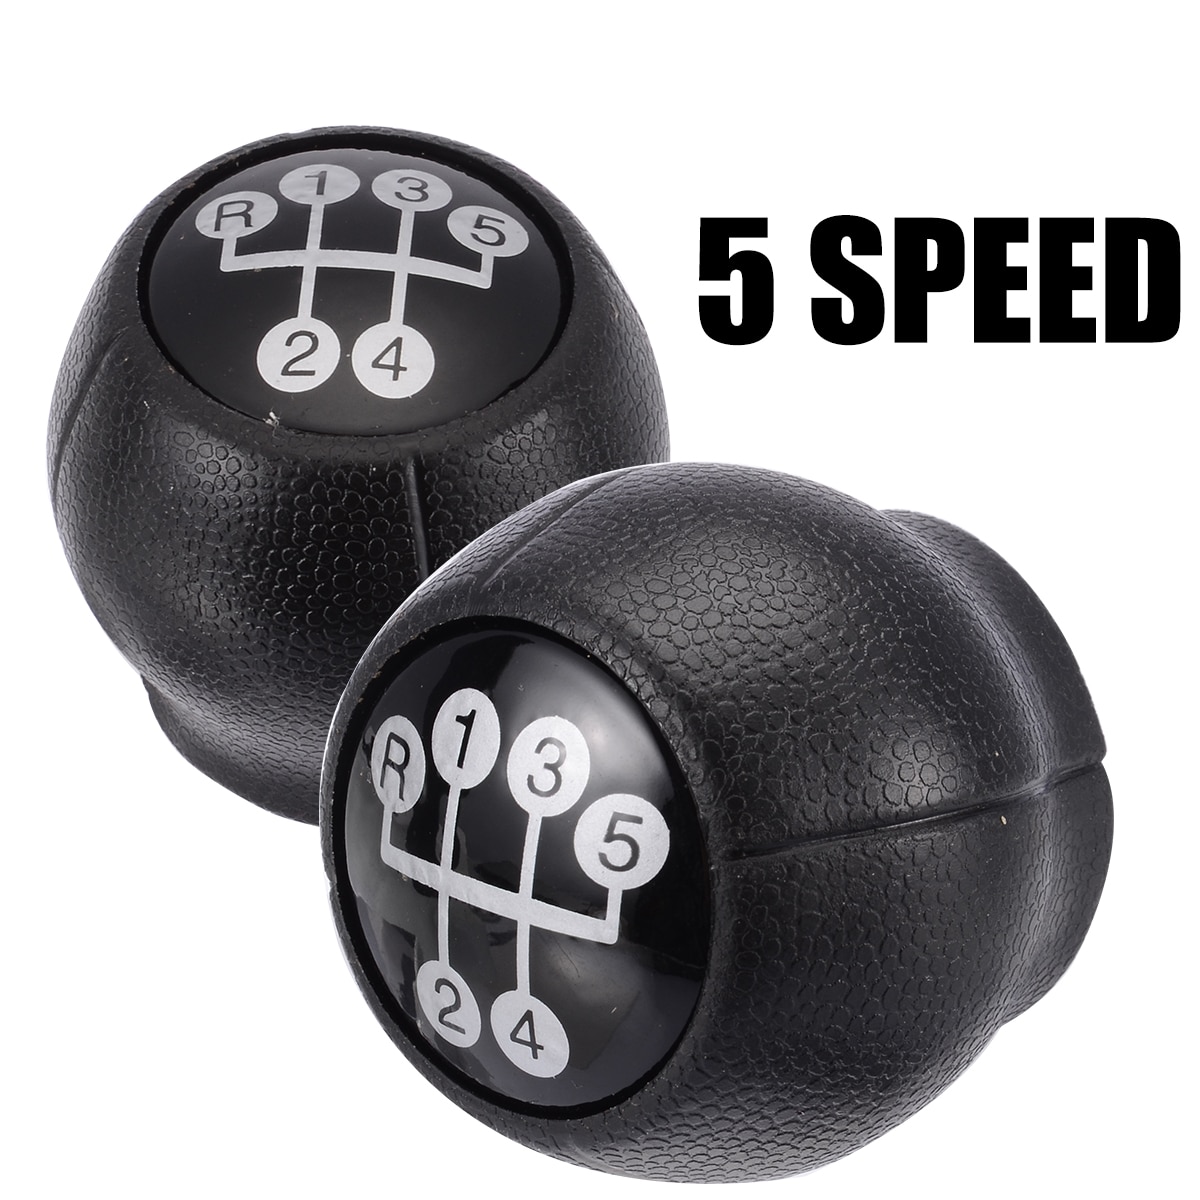 5 Speed Gear Stick Pookknop Voor Opel Vauxhall Corsa B C Vectra B Astra F G Pookknop Auto auto Styling Interieur Accessoires